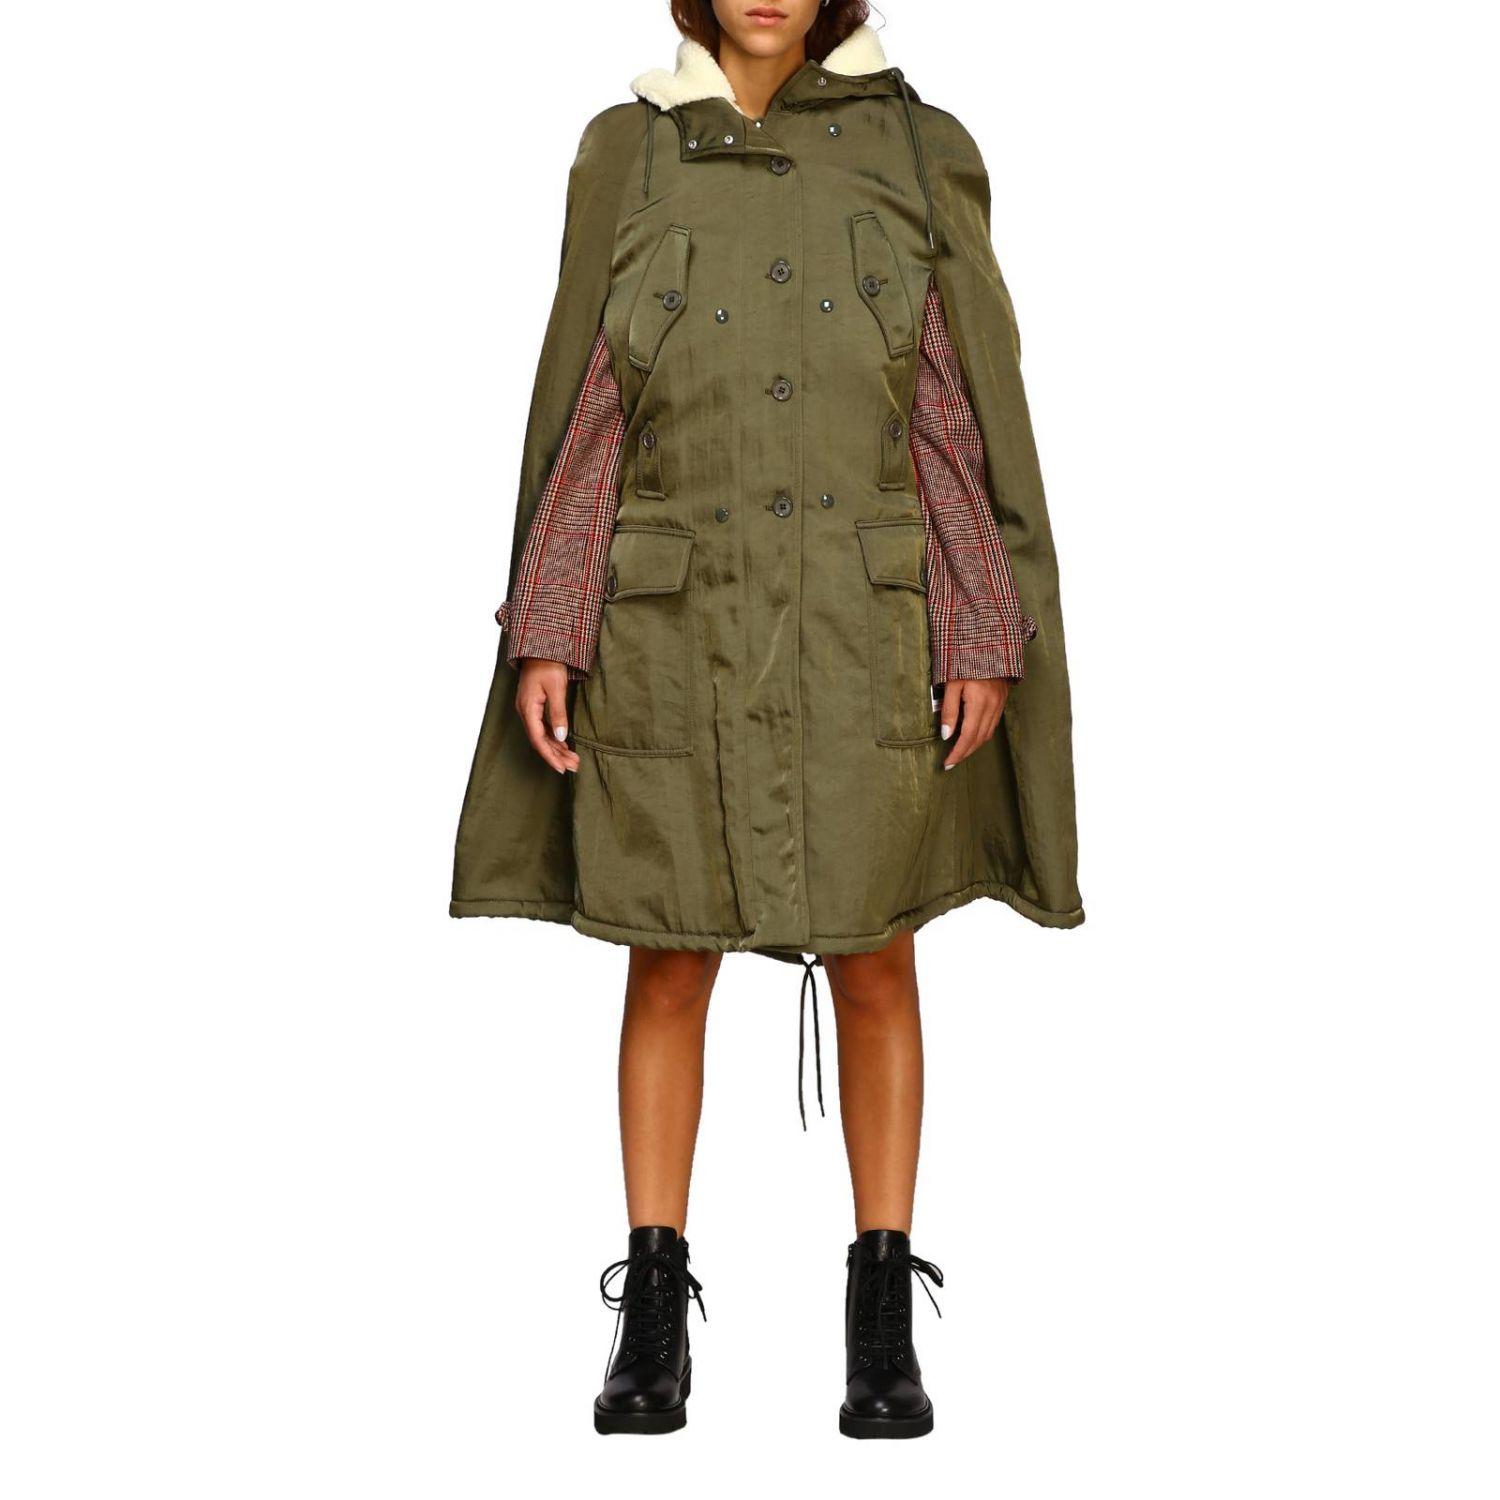 Miu Miu Cape With Hood And Teddy Bear Interior in Military (Green) - Lyst